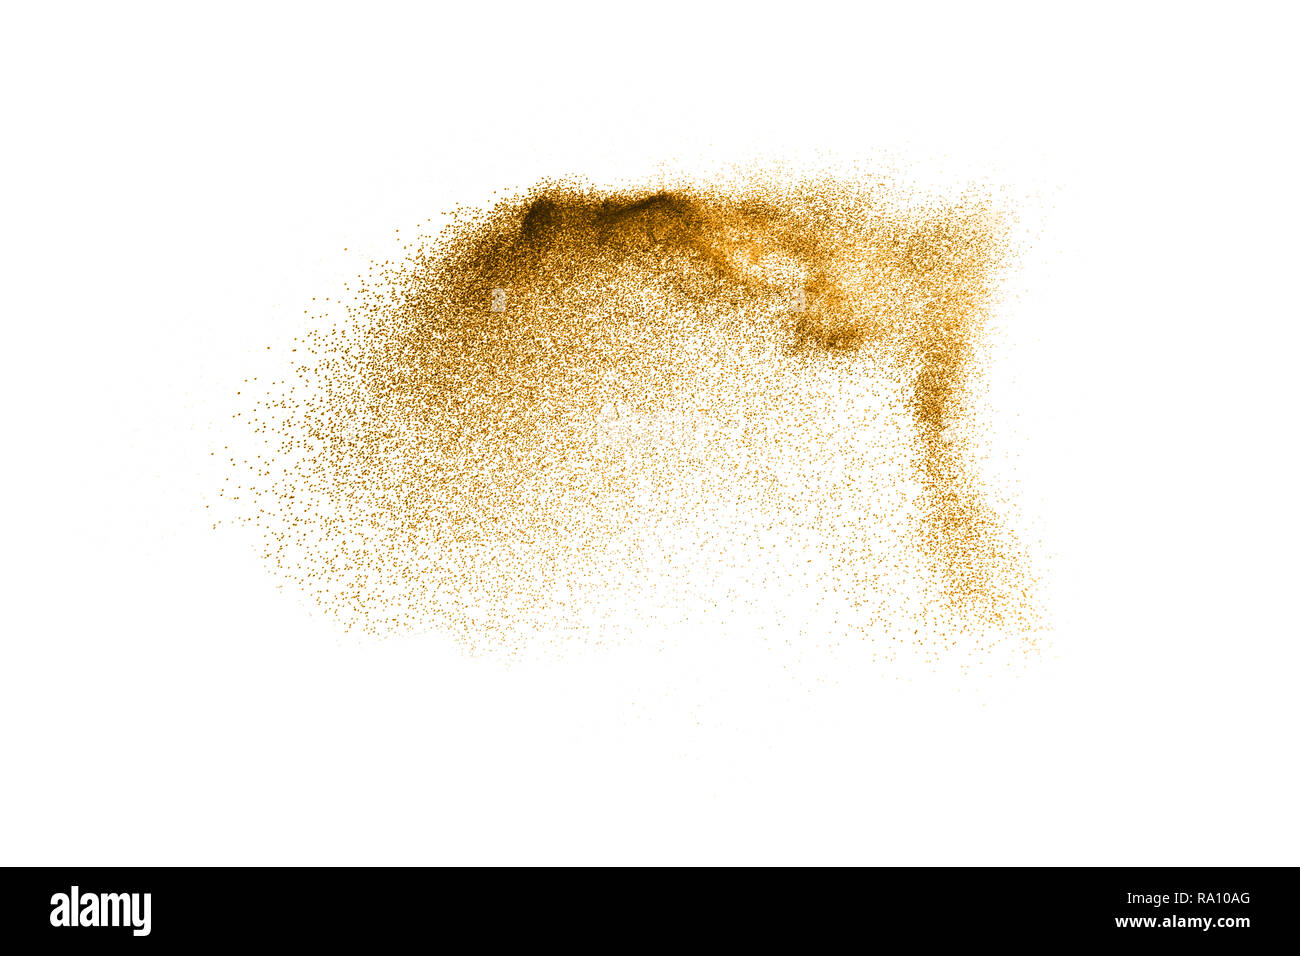 Dry river sand explosion. Brown colored sand splash against  white background. Stock Photo